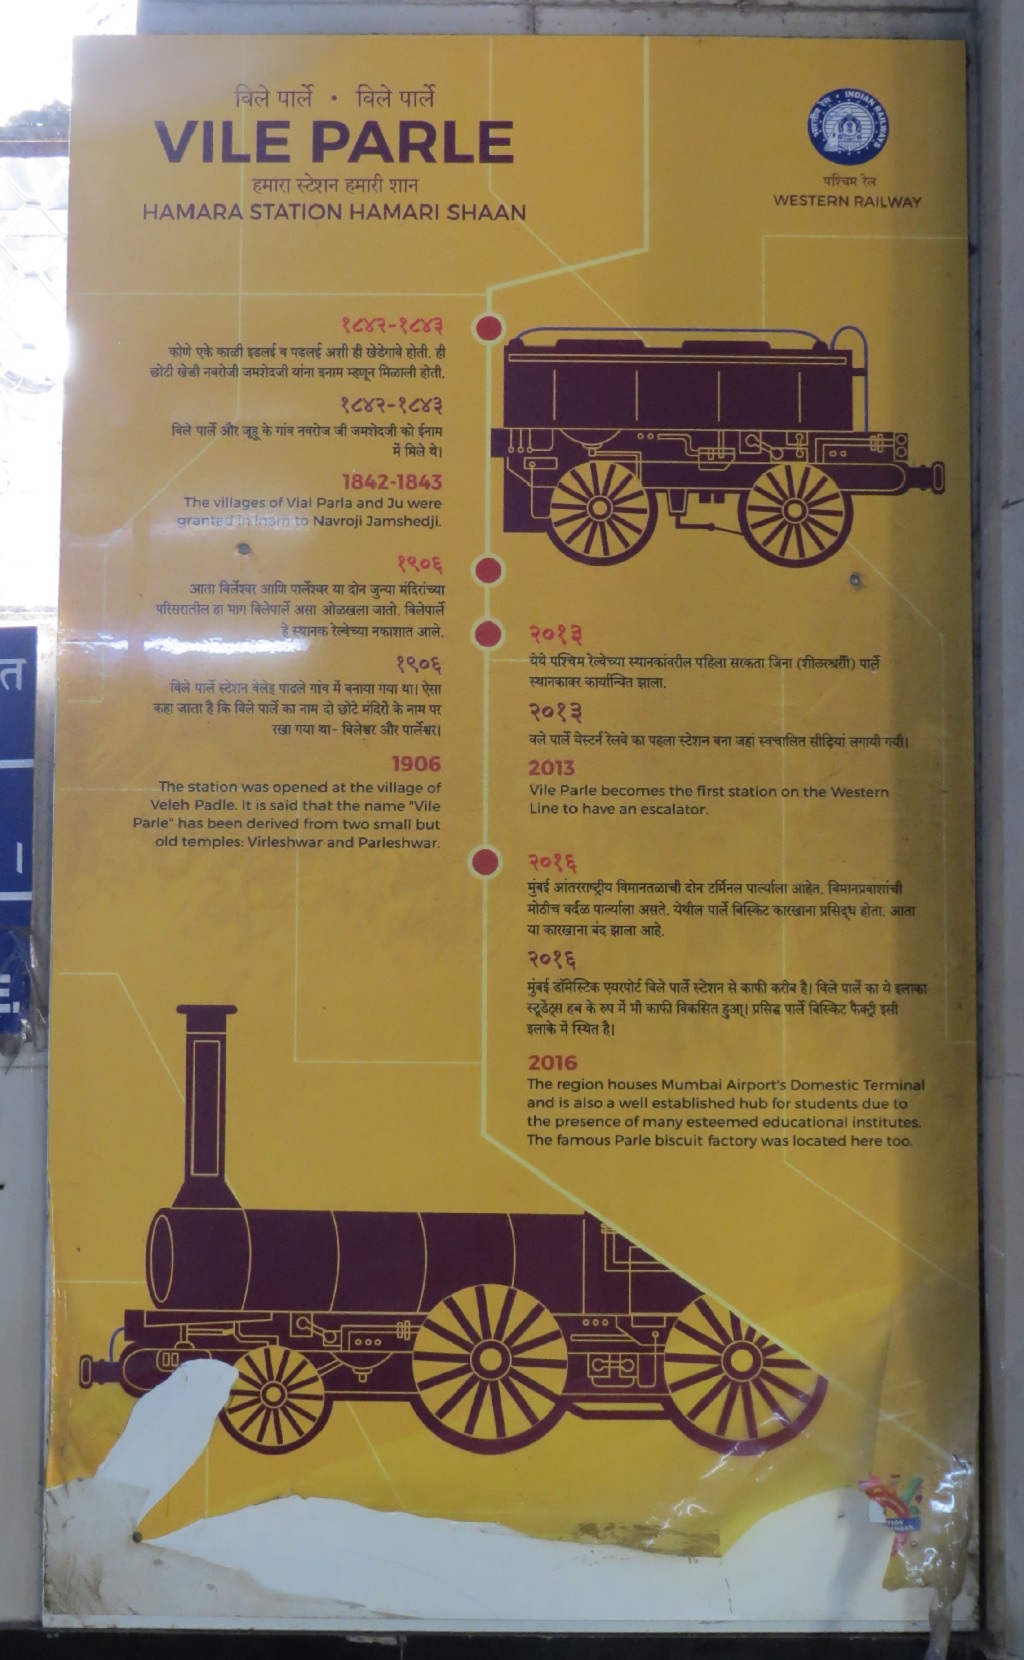 About: Vile Parle Railway Station – Opened in 1906